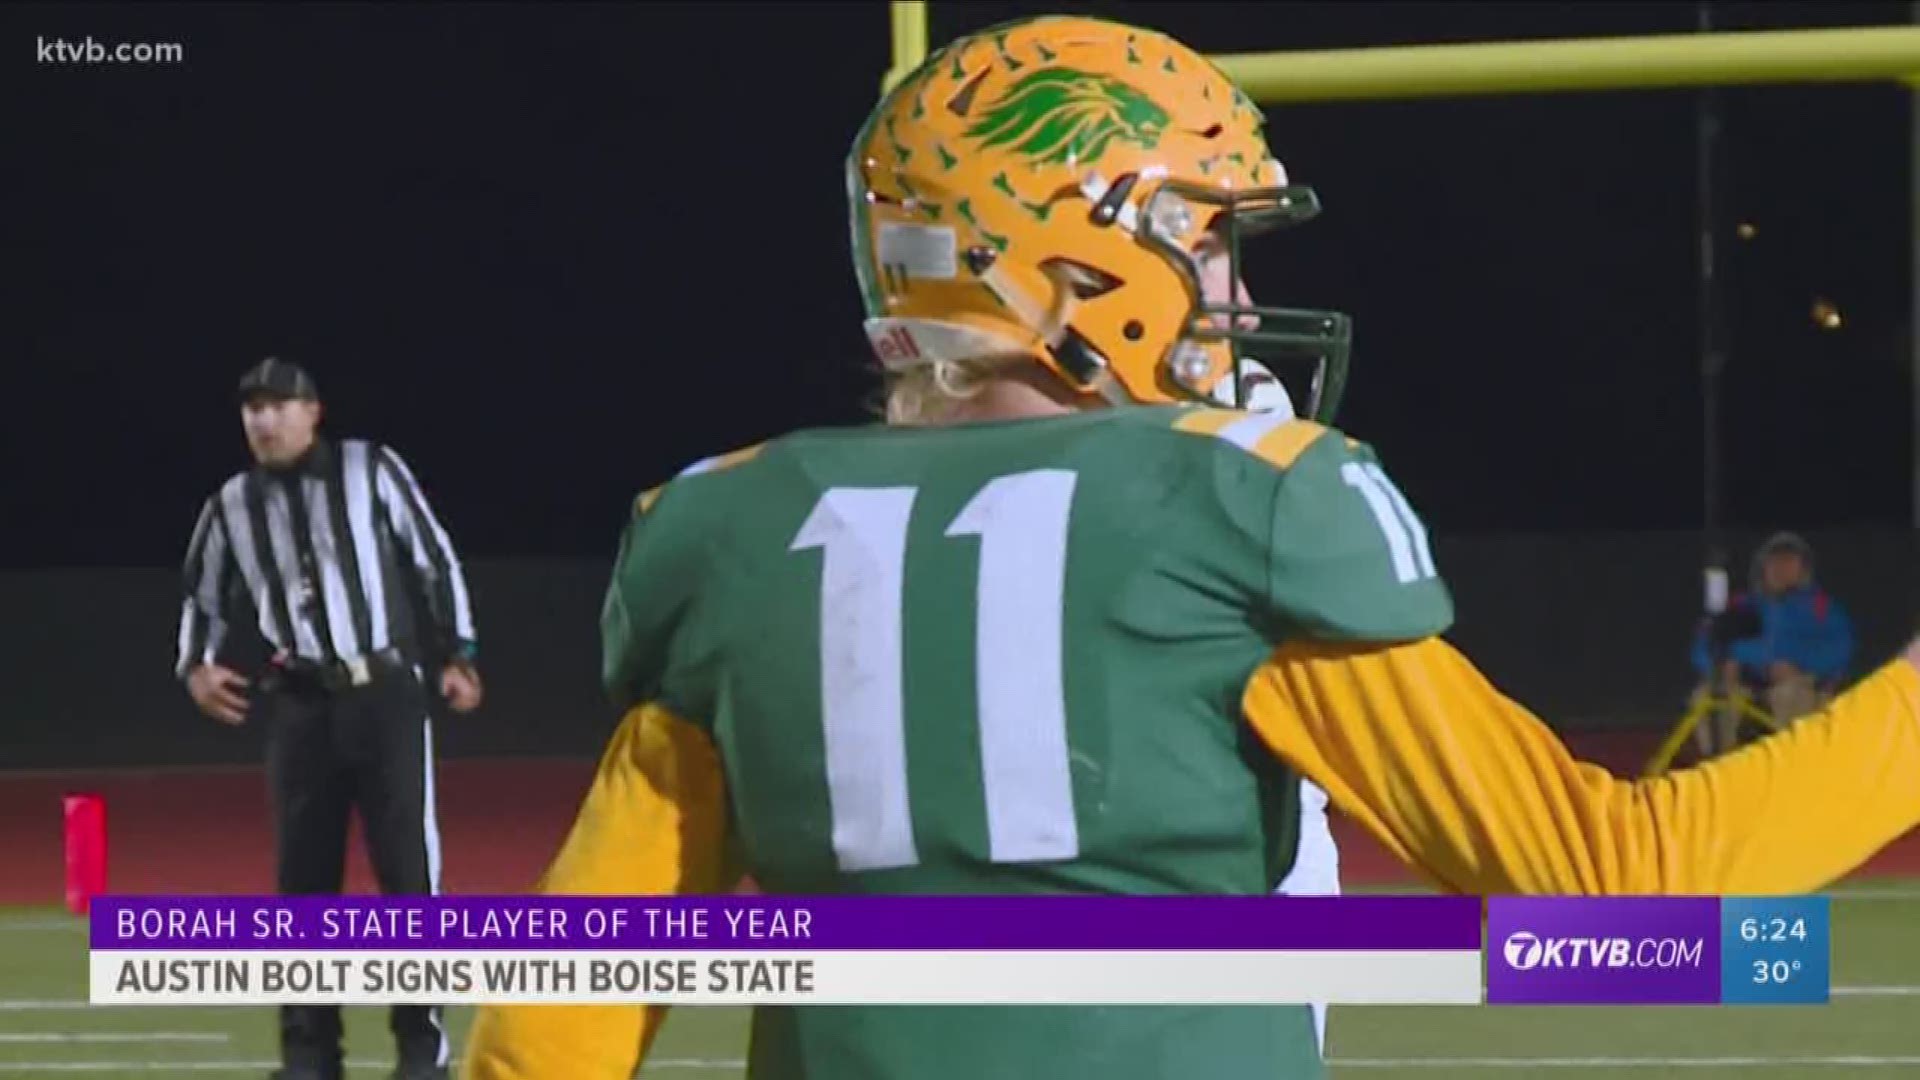 The Boise State football team picked up a local star player from Borah High School on early signing day.